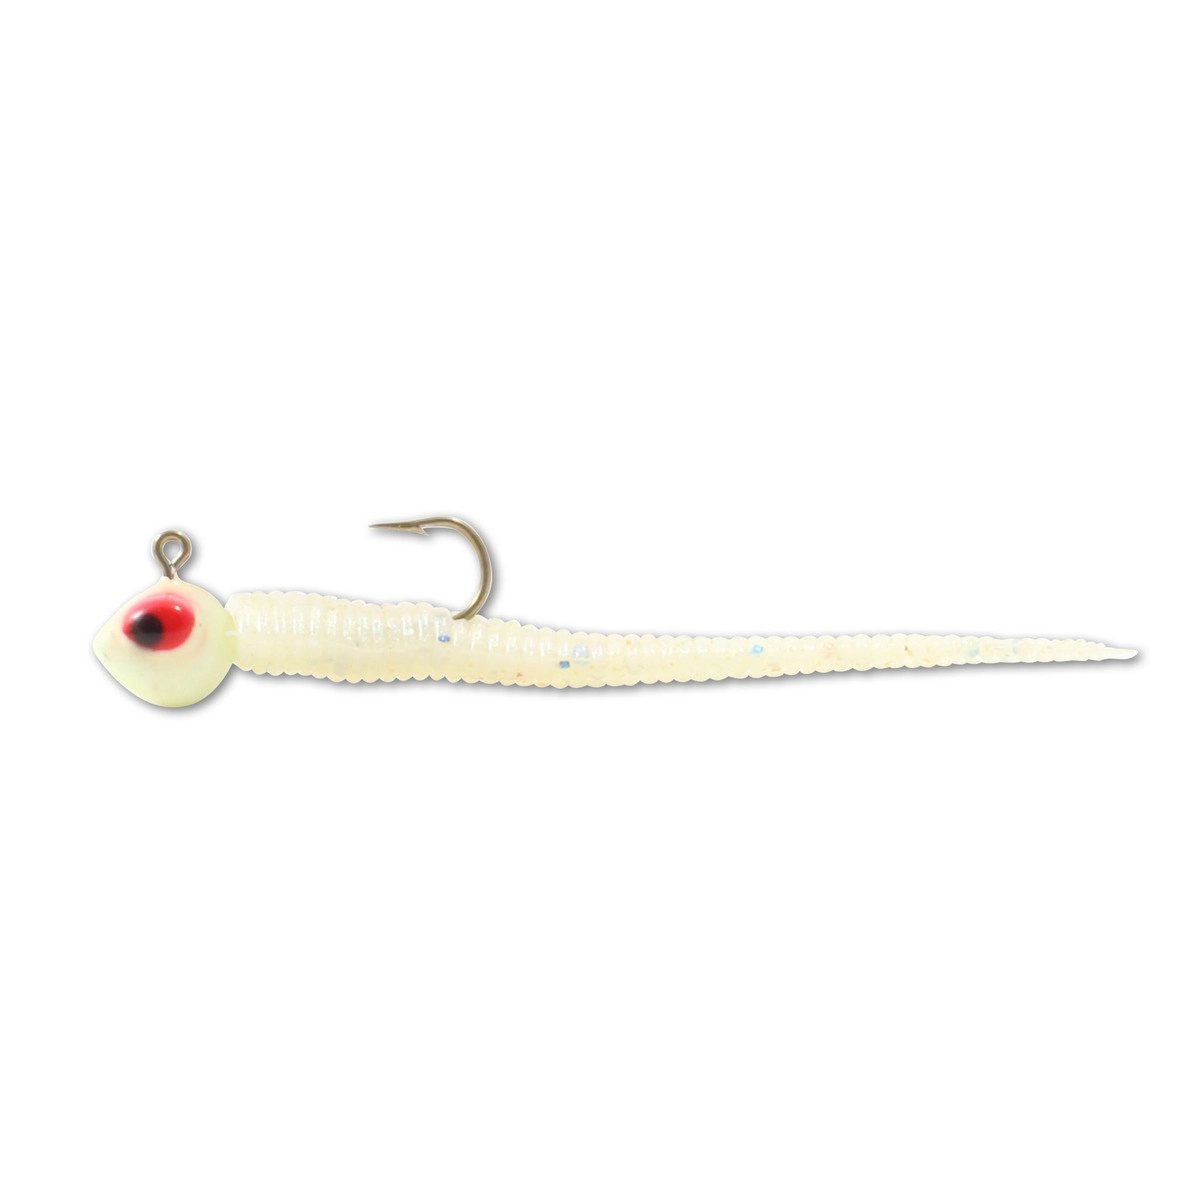 Northland Impulse Rigged Bloodworm - Mel's Outdoors